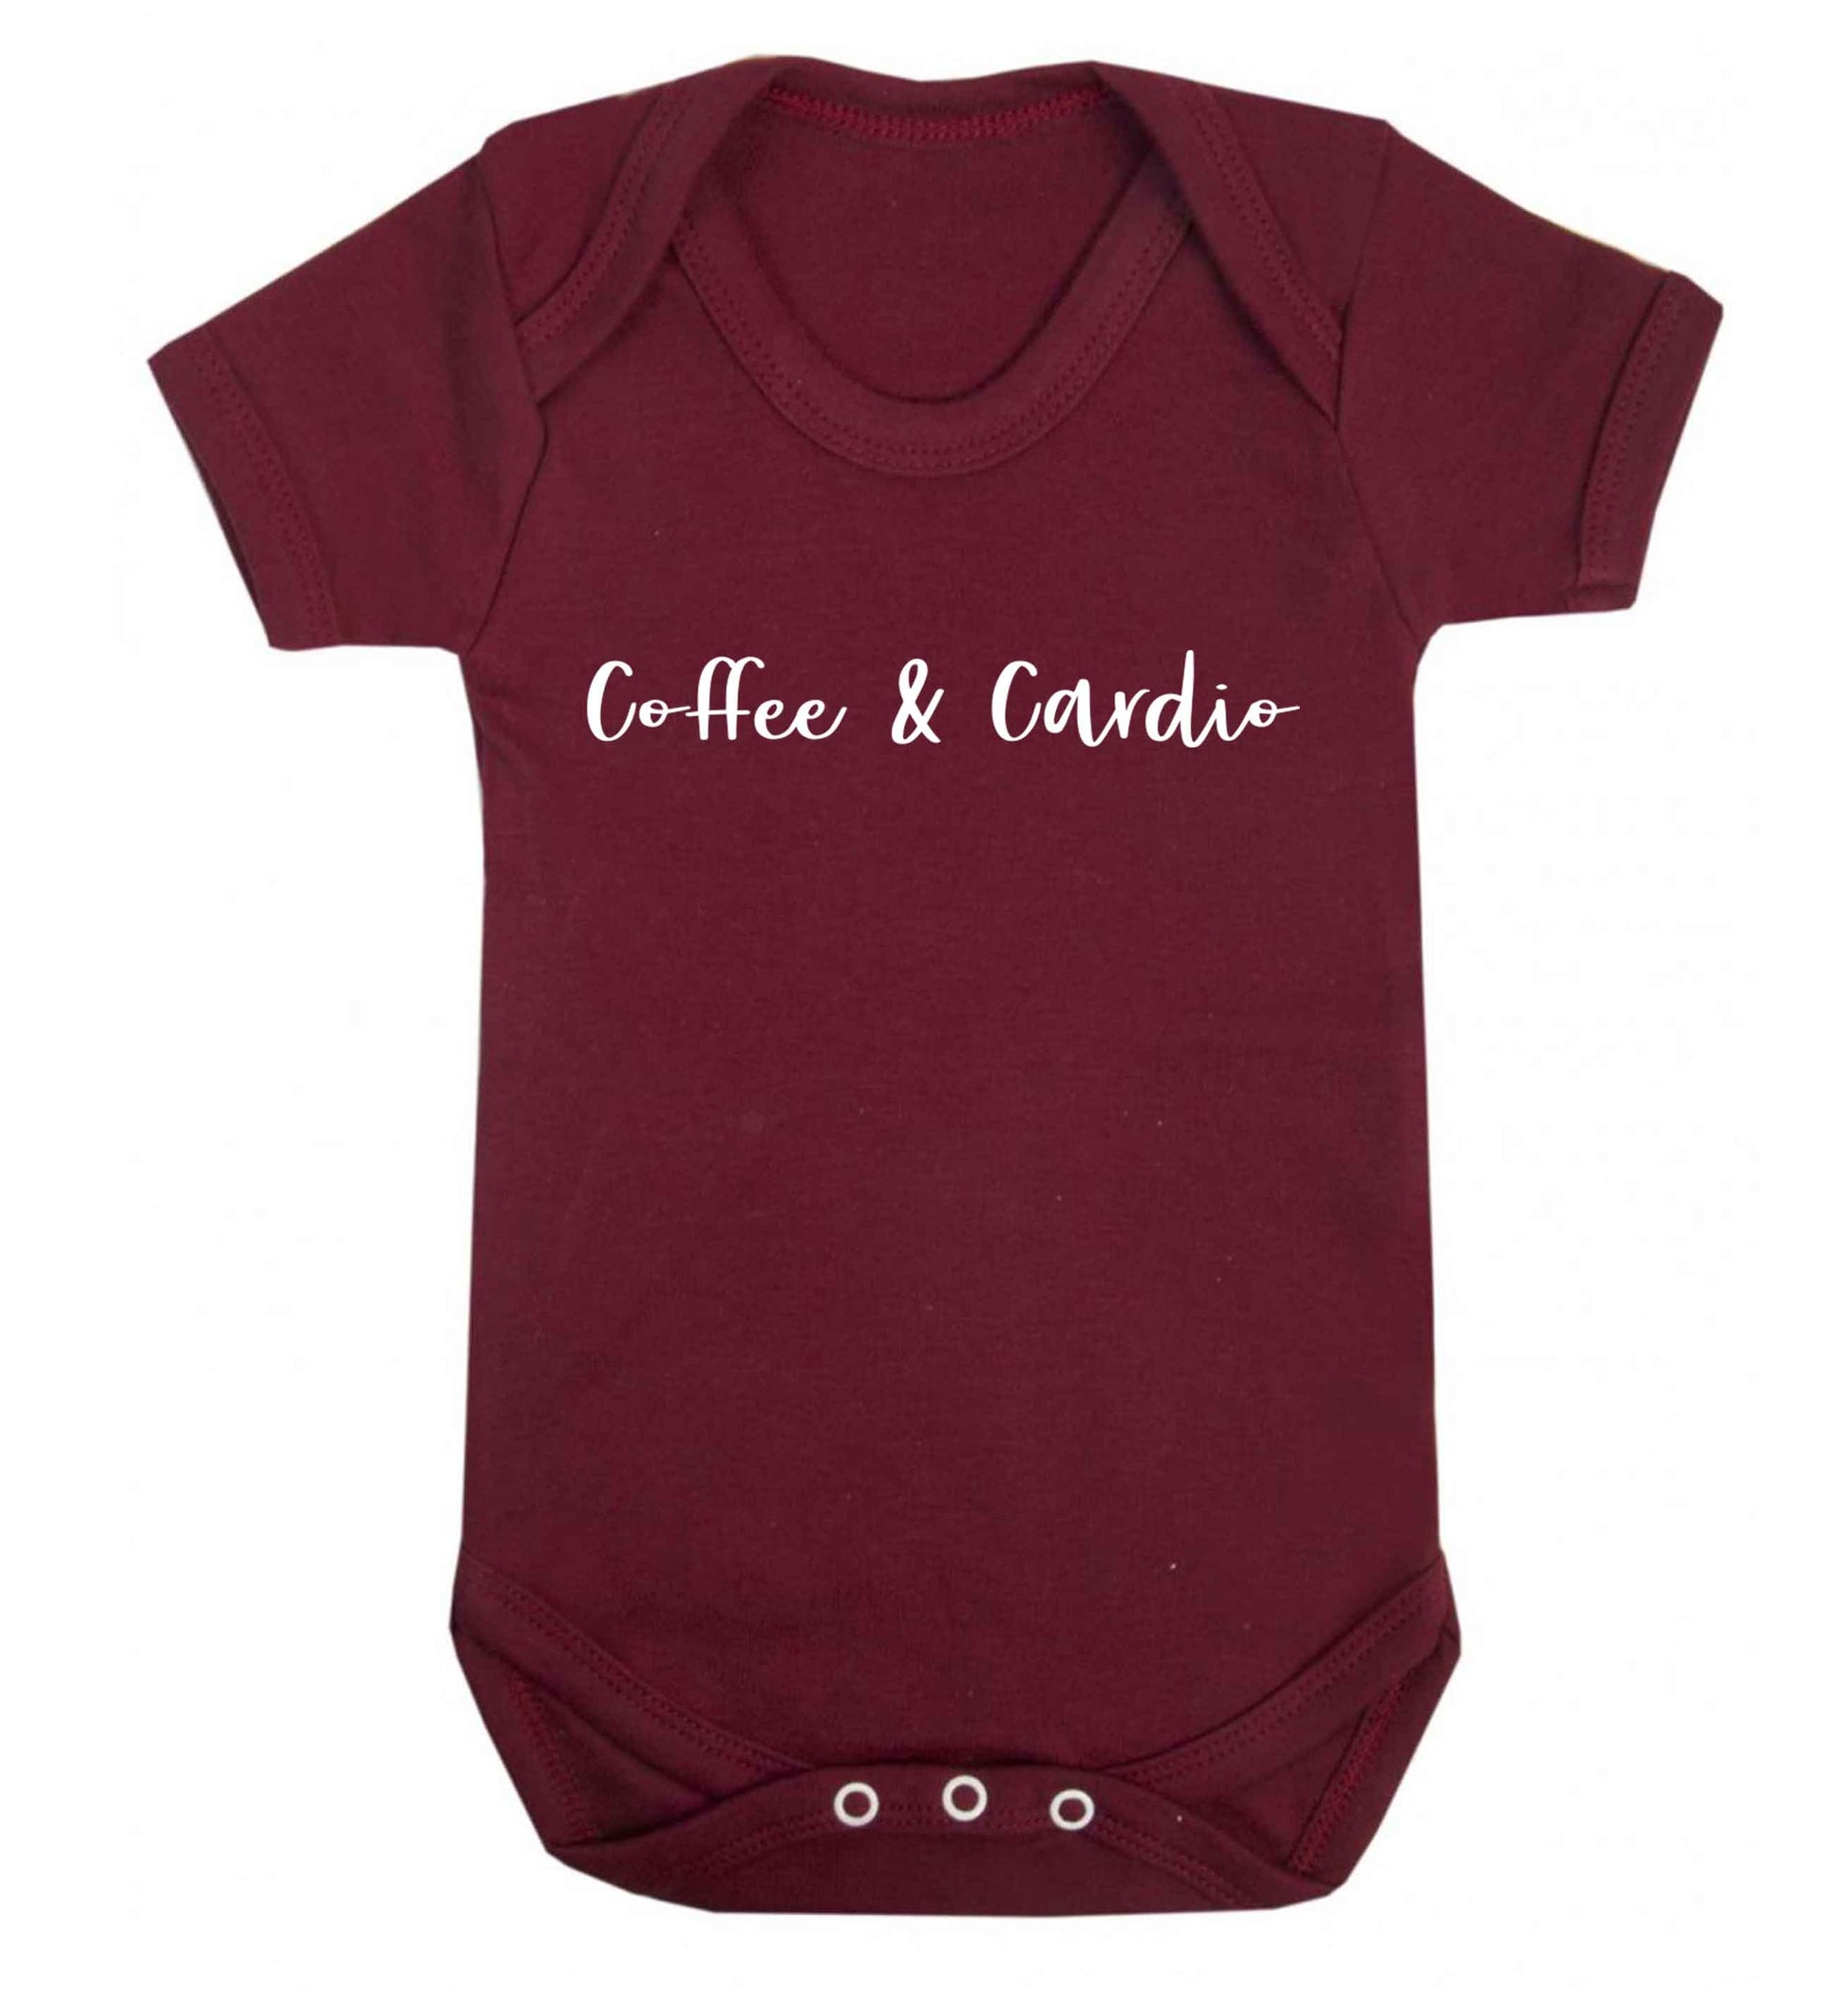 Coffee and cardio Baby Vest maroon 18-24 months